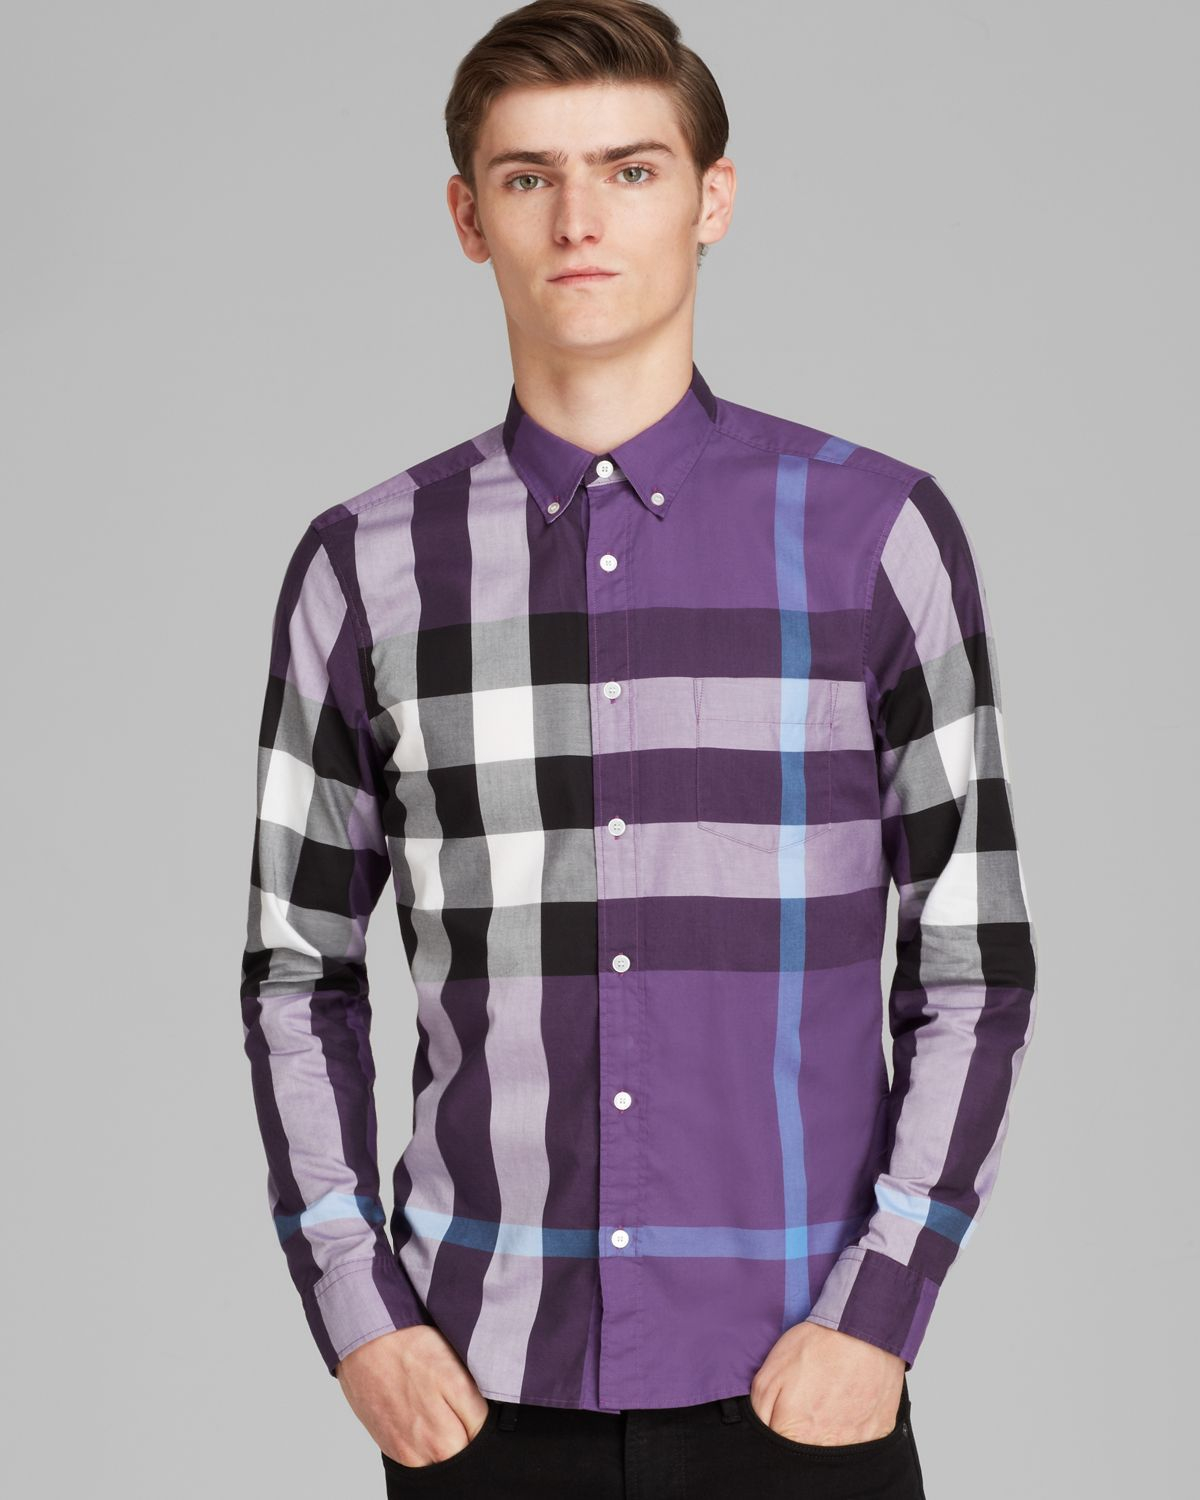 Lyst - Burberry Brit Fred Sport Shirt Slim Fit in Purple for Men